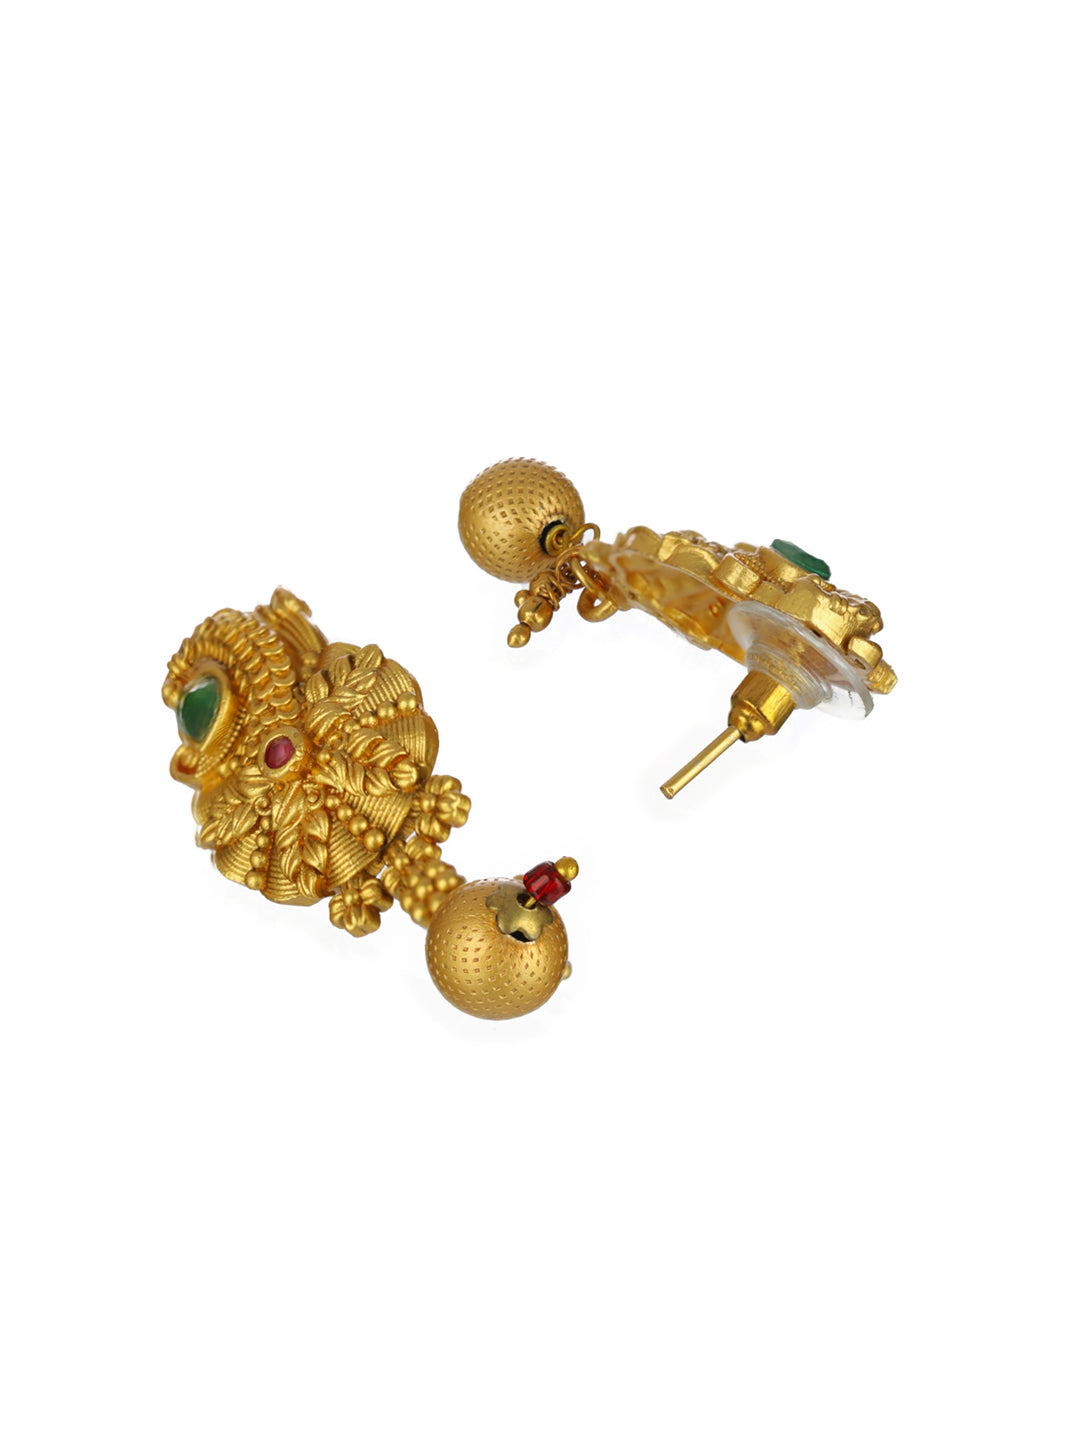 Priyaasi Floral Peacock Studded Gold-Plated Jewellery Set